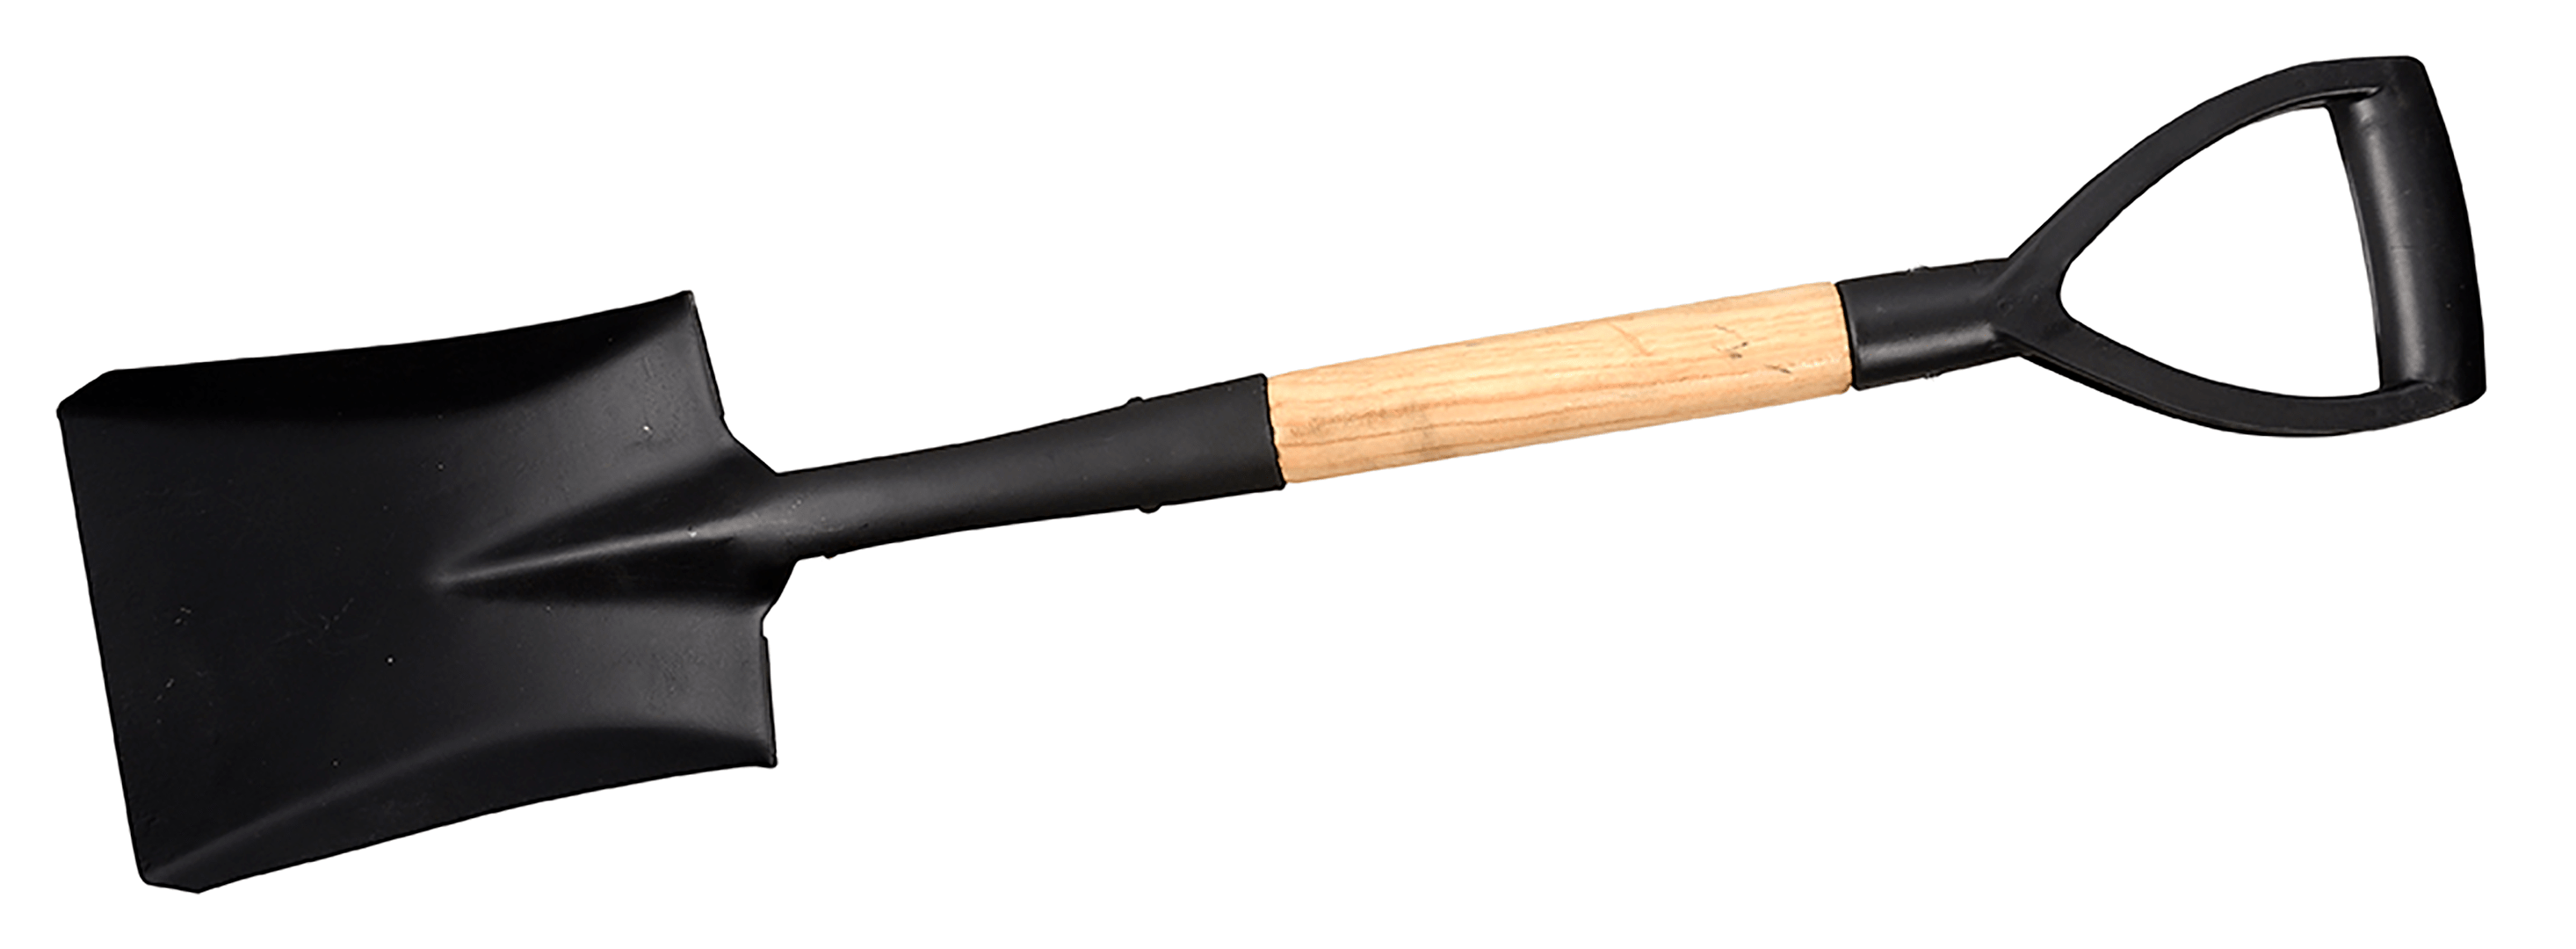 Small shovel with wooden shaft